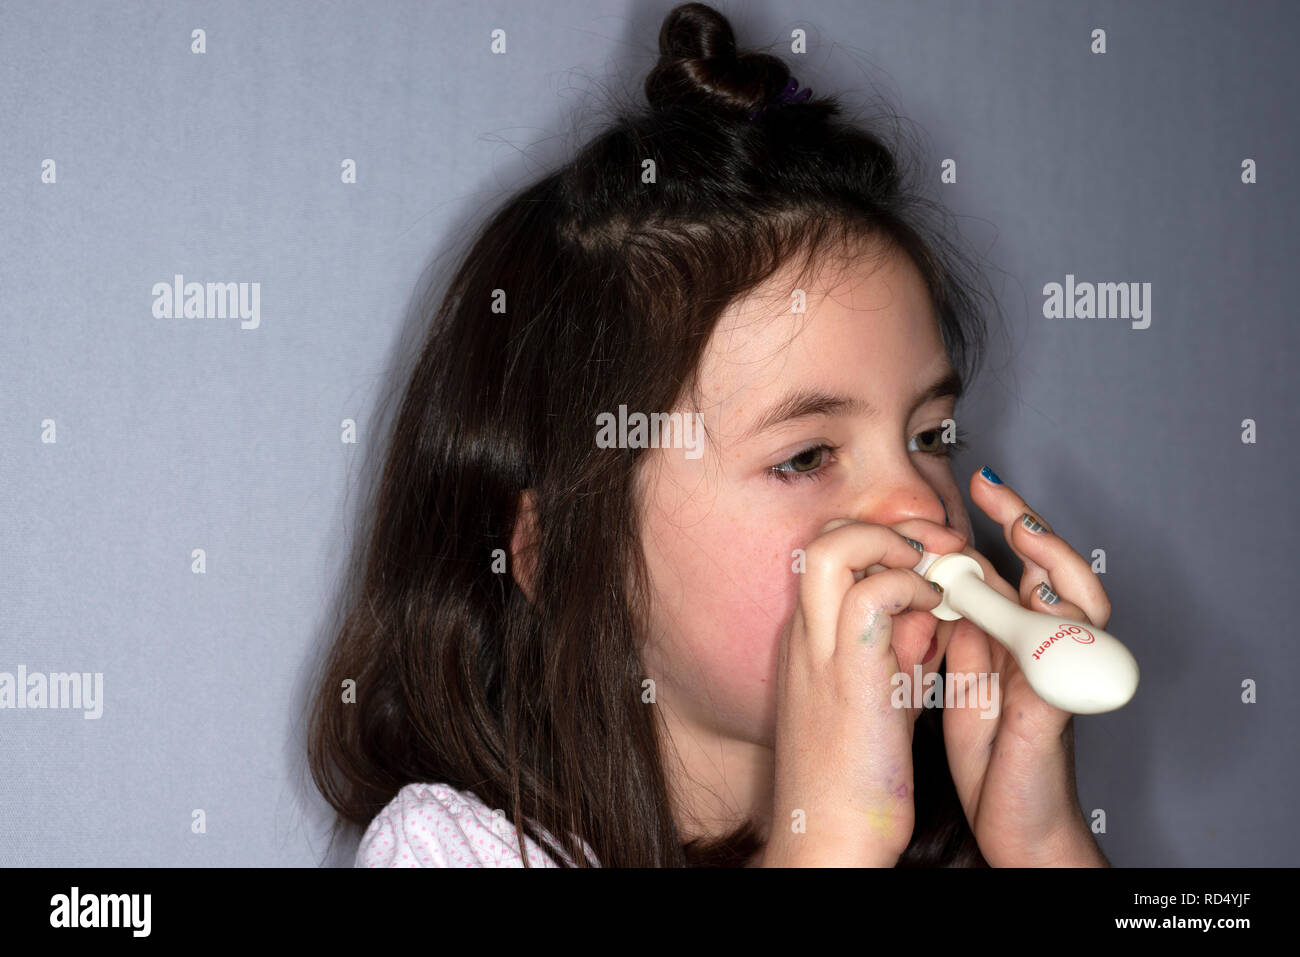 Otovent nasal ballon for treatment of clogged ears, fluid in the ears, and ear infections. Stock Photo